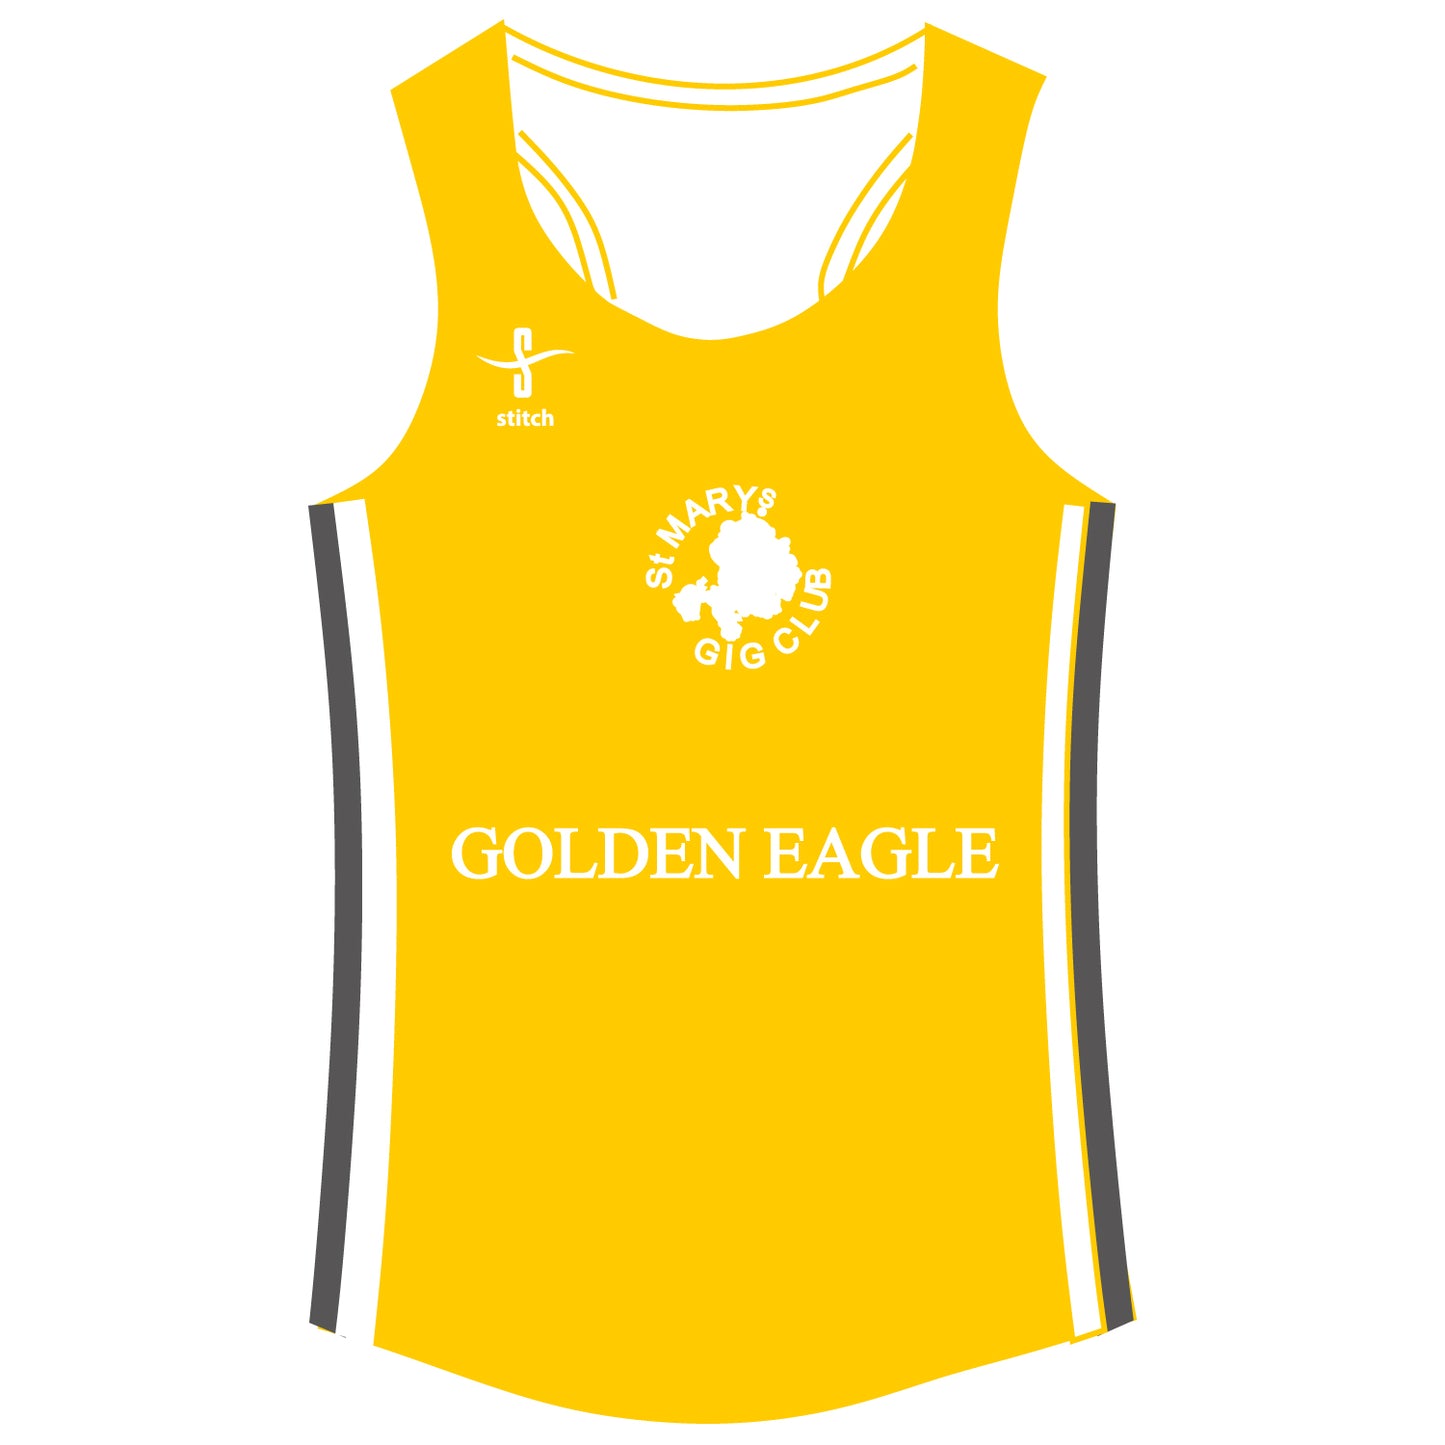 St Mary's Gig Club Golden Eagle Vest